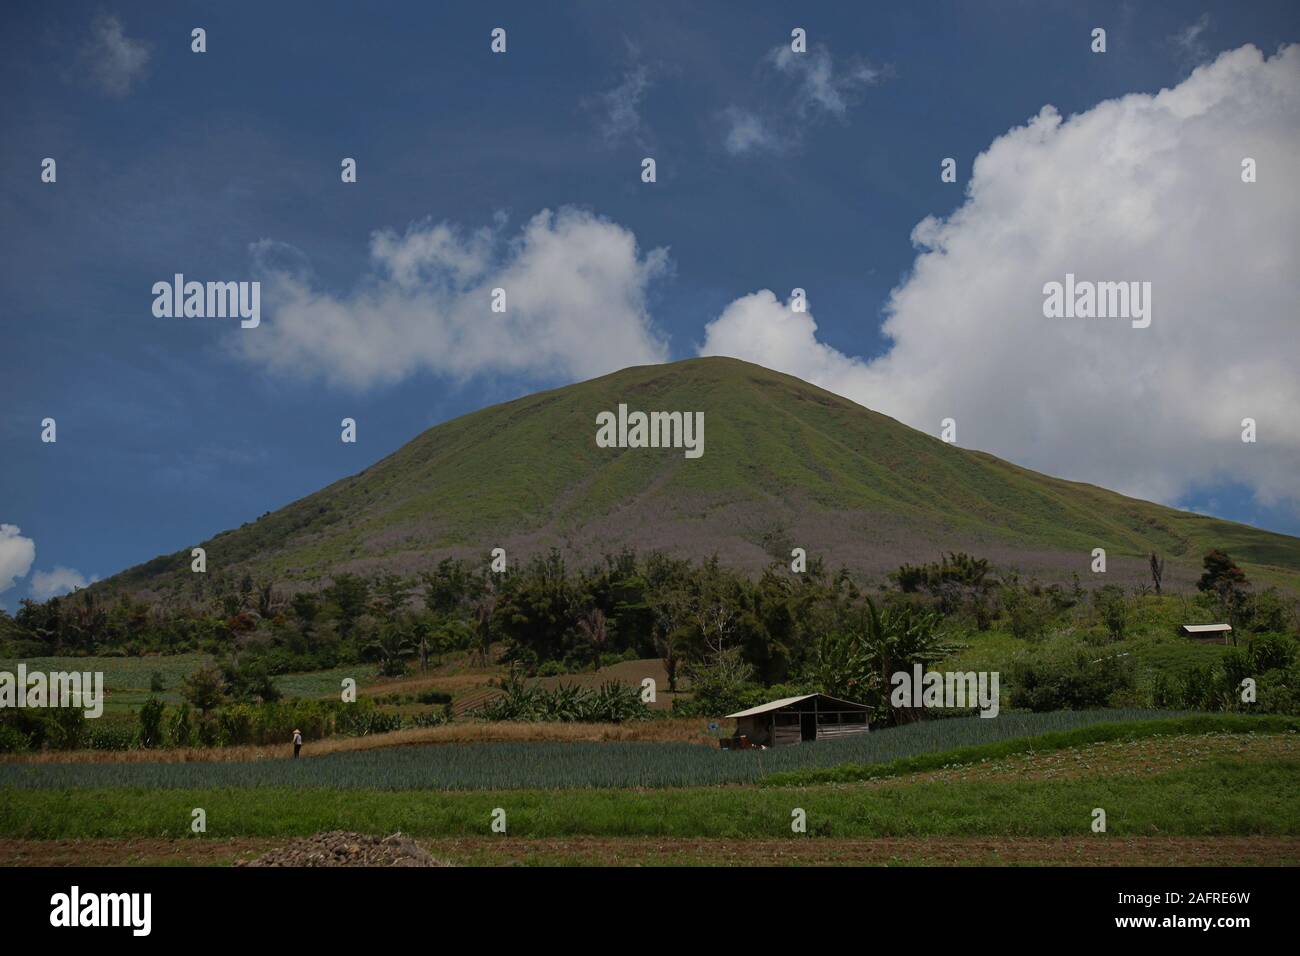 Scenery of Mount Lokon, an active volcano in Tomohon, North Sulawesi, Indonesia. Stock Photo